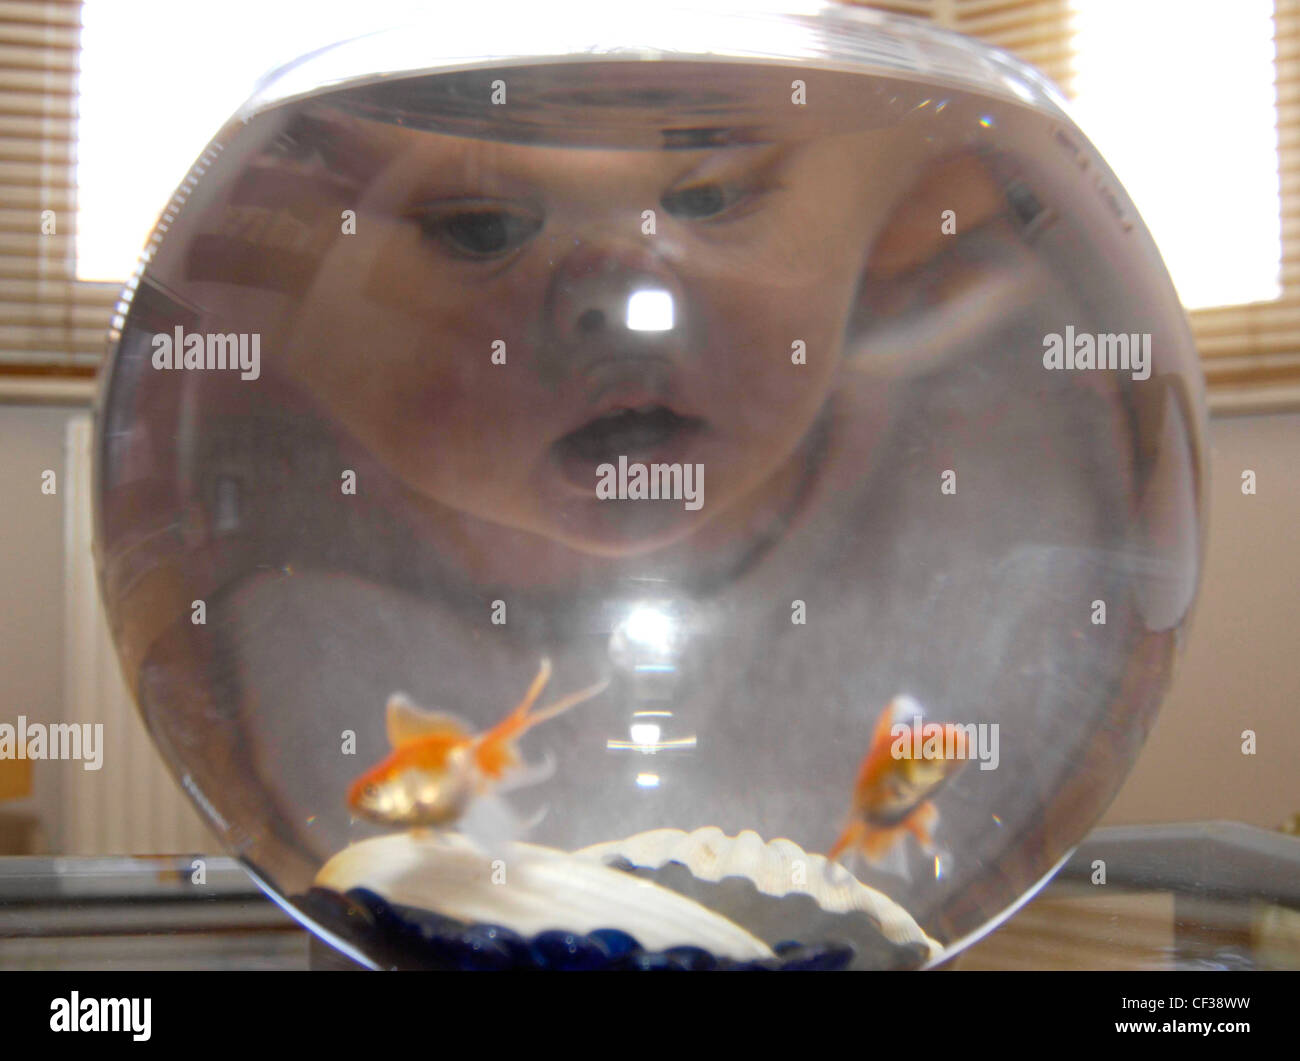 a-young-toddler-watching-goldfish-in-a-glass-bowl-her-face-is-distorted-CF38WW.jpg